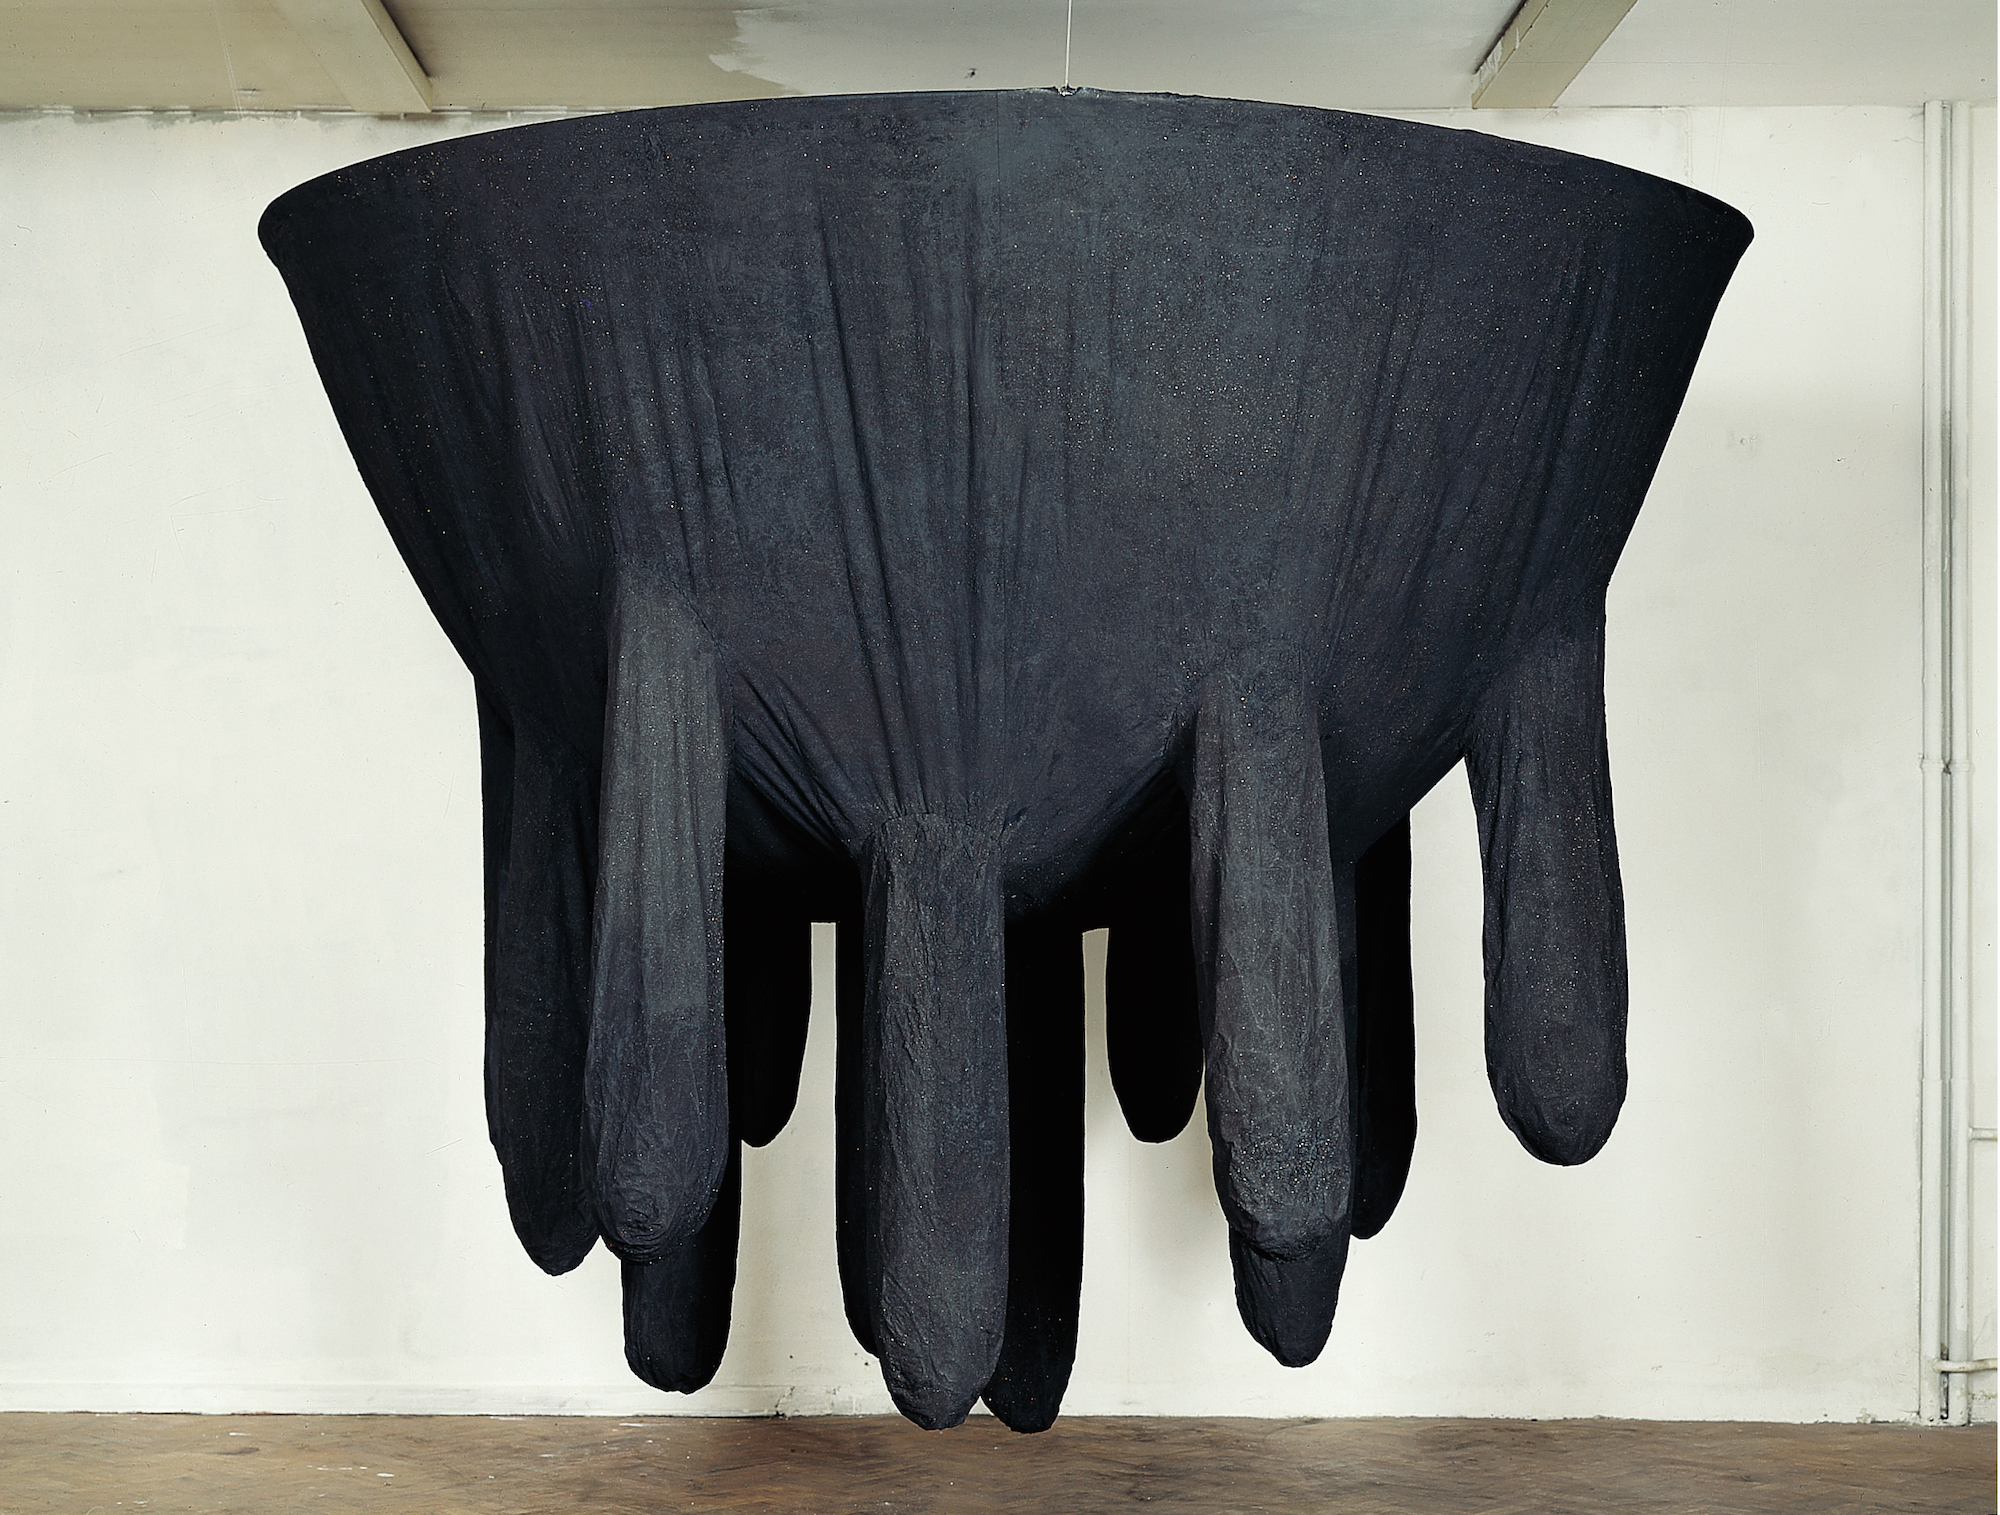 A large black udder made of what looks like a soft fabric hangs from the ceiling.